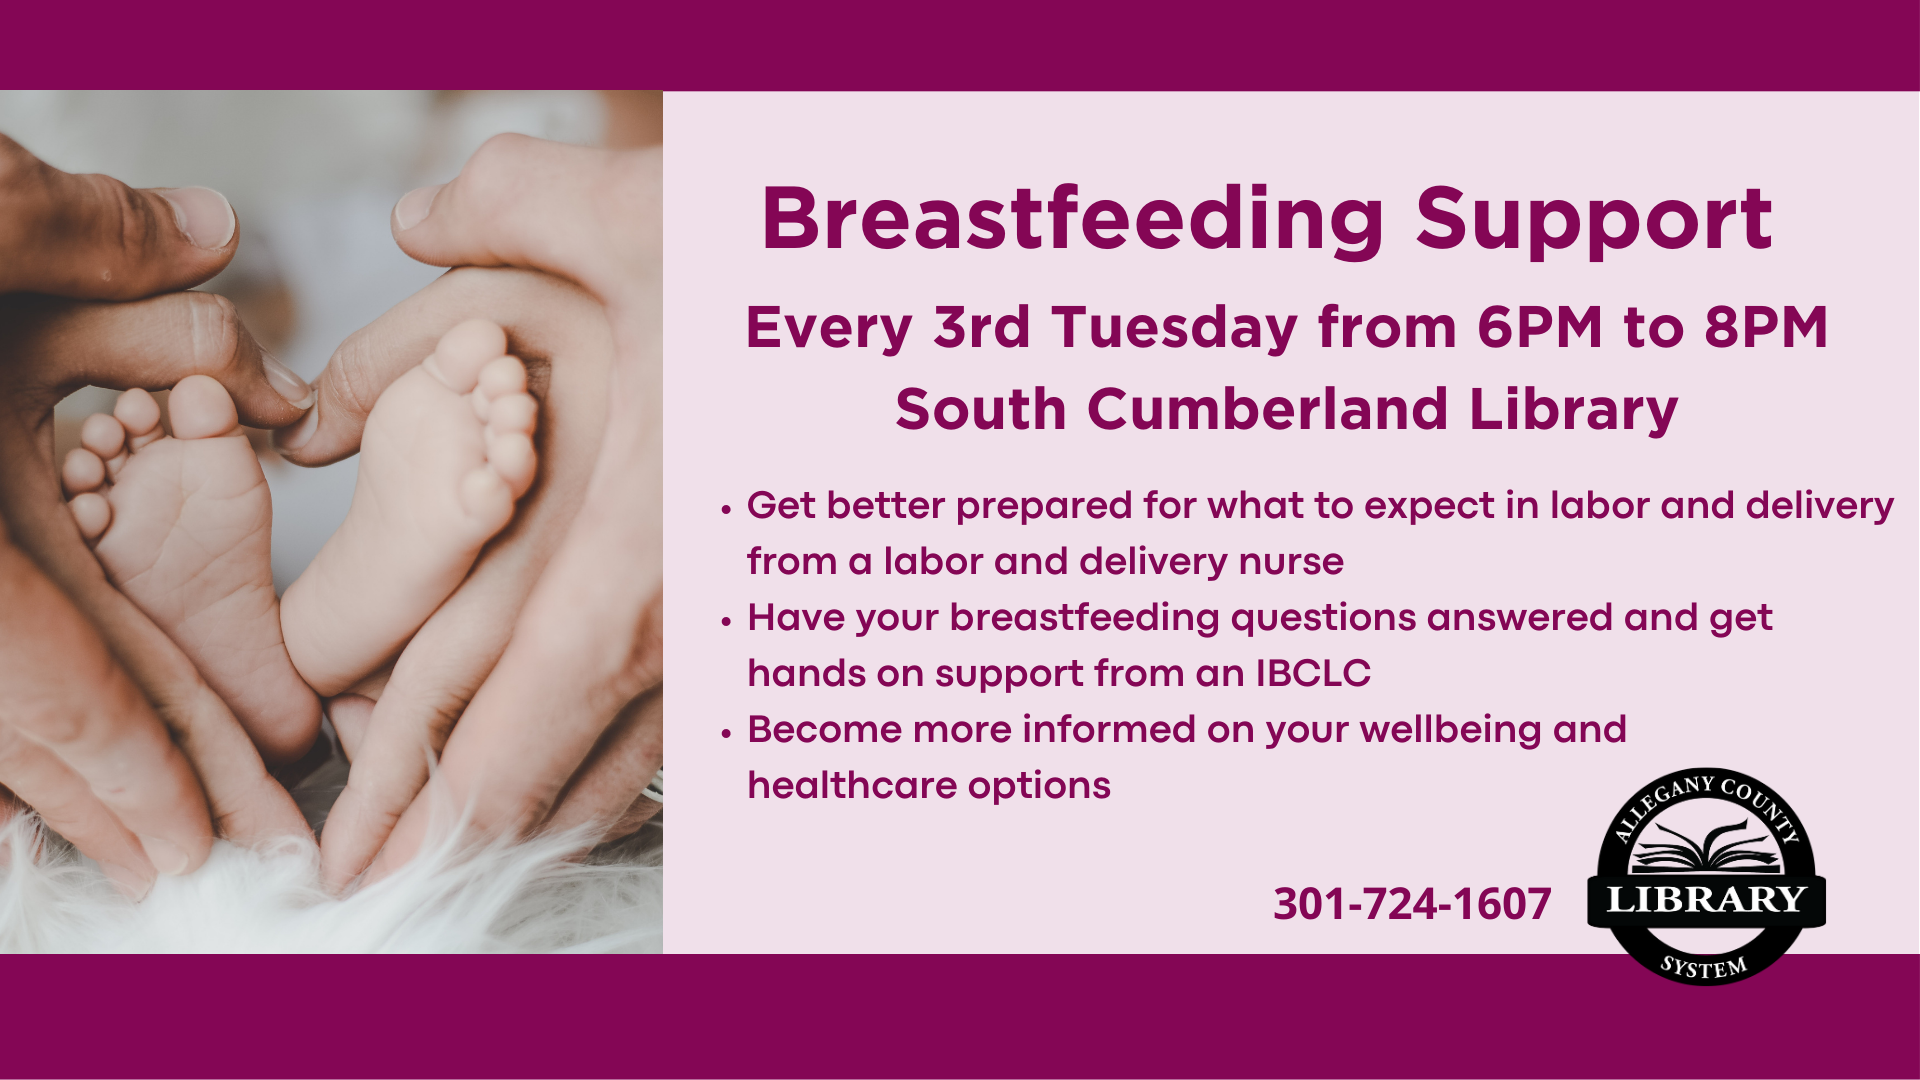 Breastfeeding Support event details, picture to the left of two sets of hands making a heart around baby feet